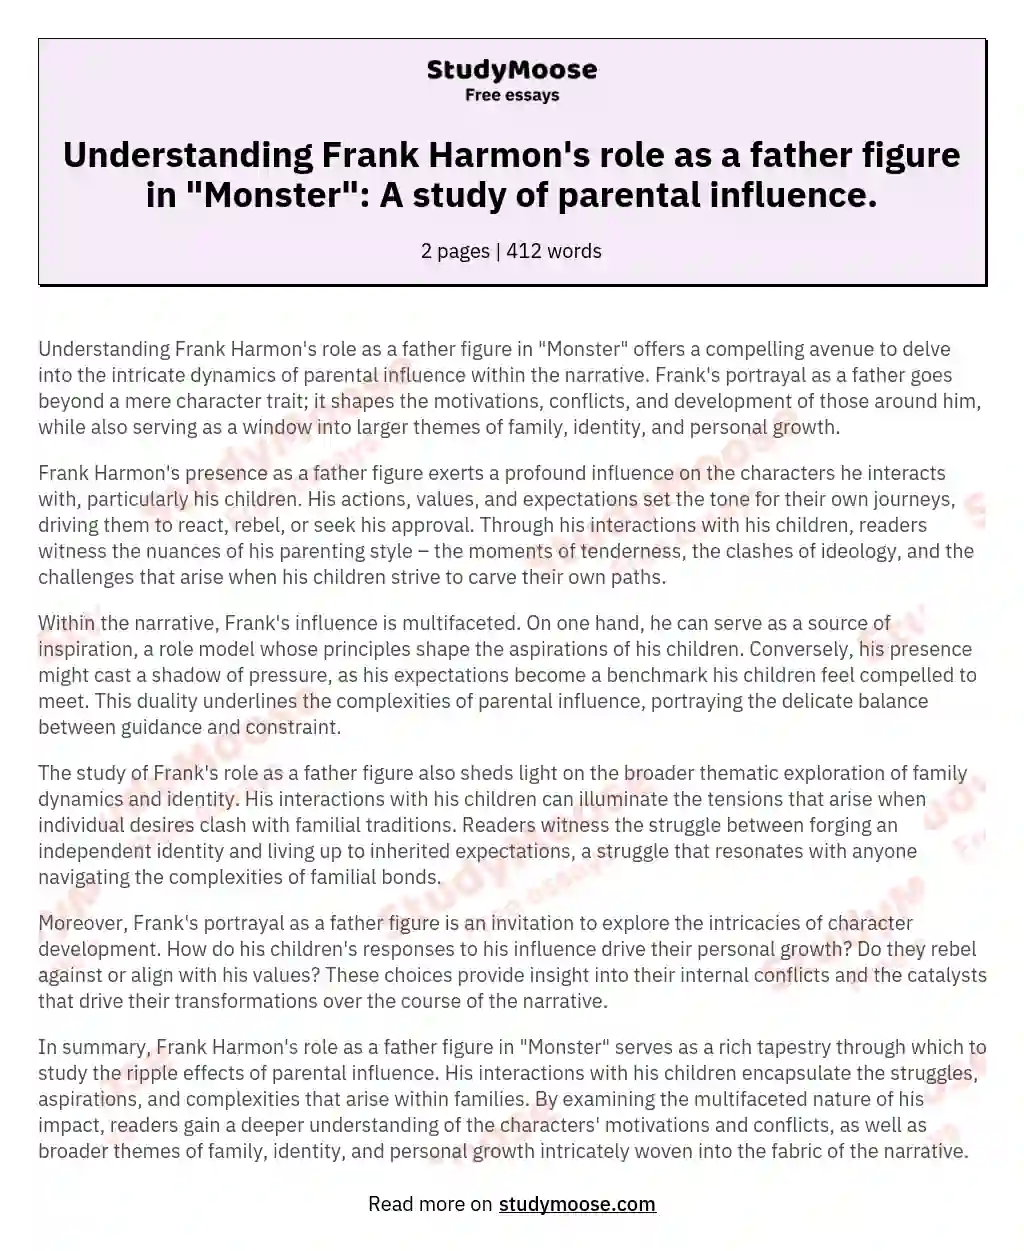 Understanding Frank Harmon's role as a father figure in "Monster": A study of parental influence. essay